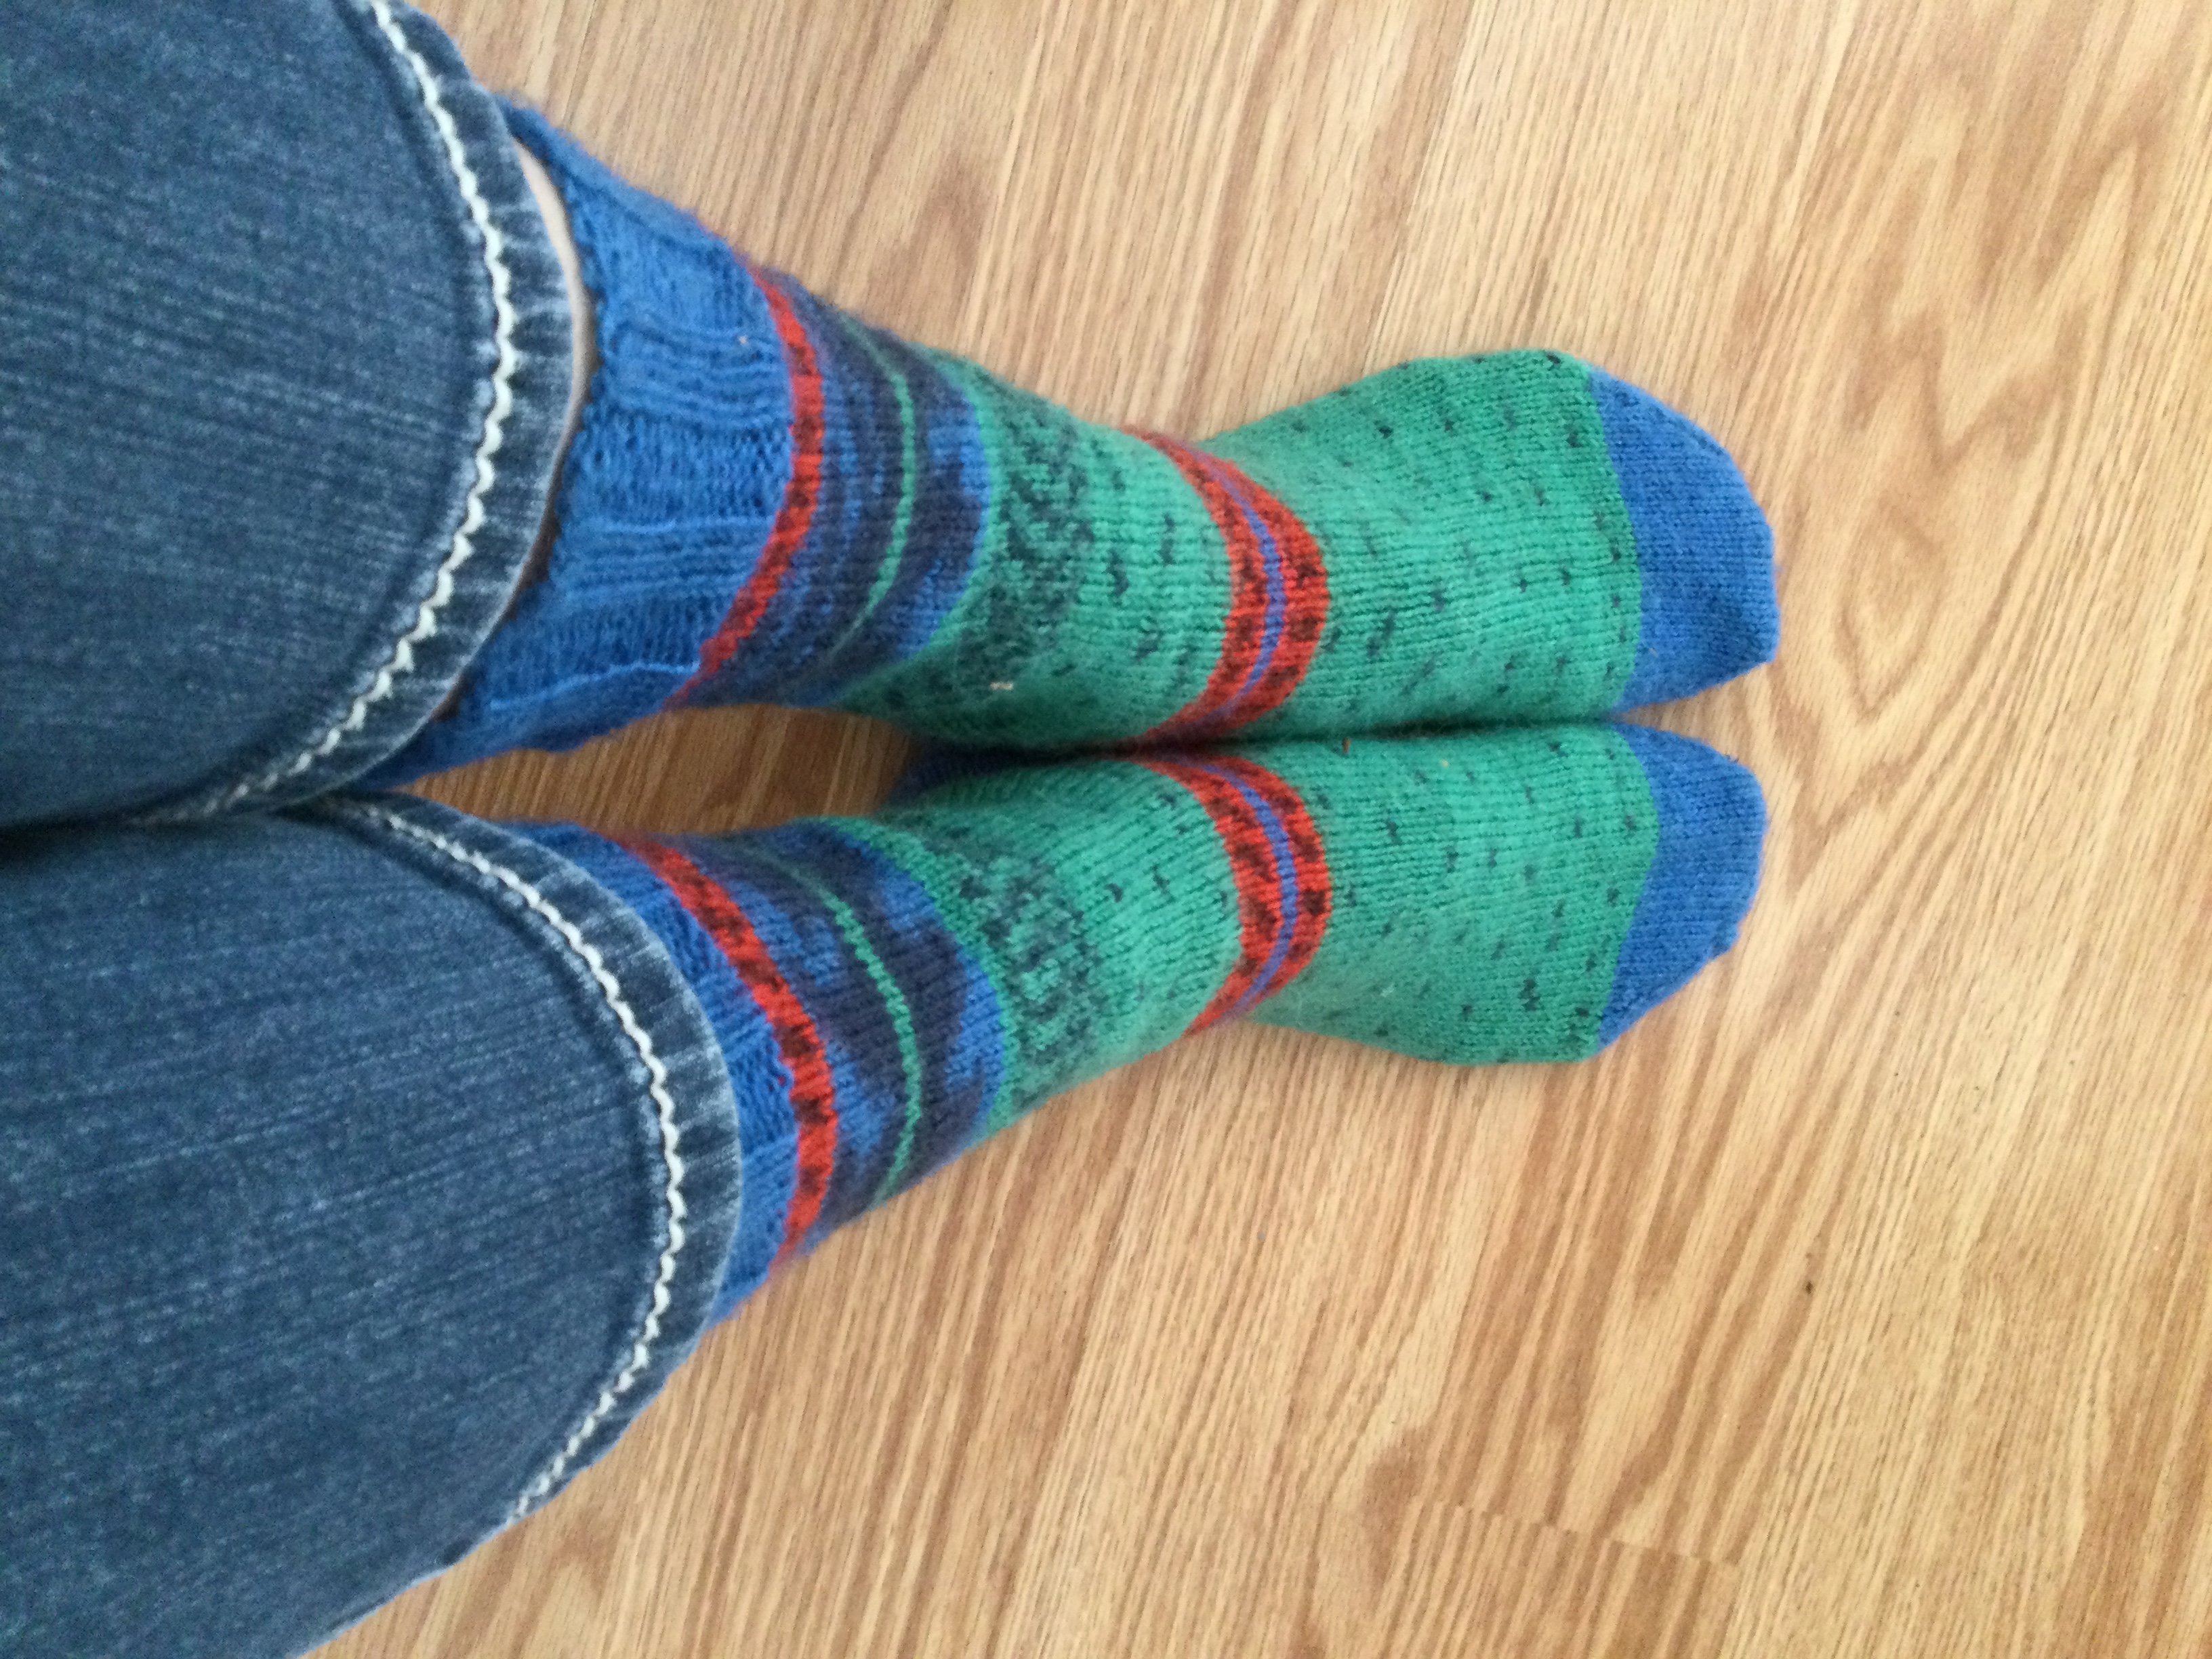 Shelley finished her amazing pair of socks.